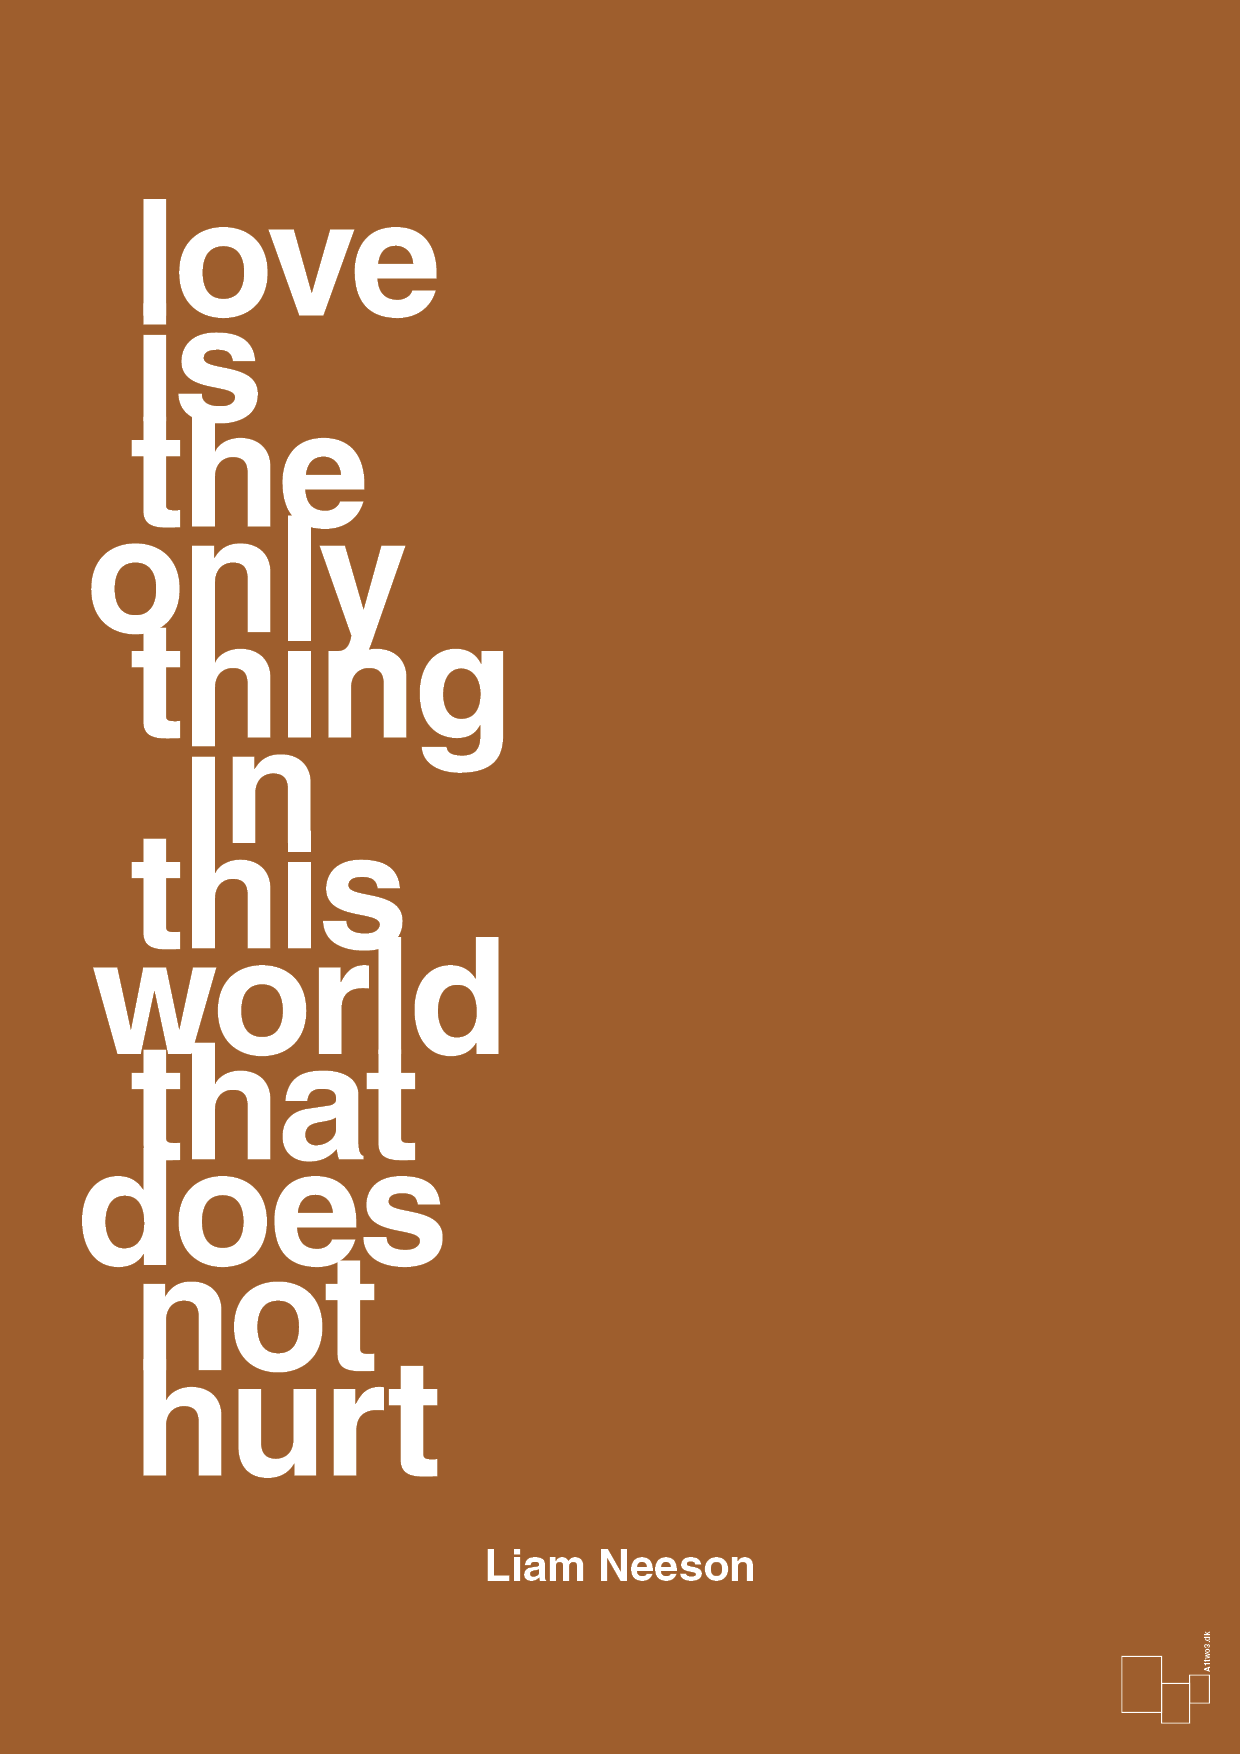 love is the only thing in this world that does not hurt - Plakat med Citater i Cognac